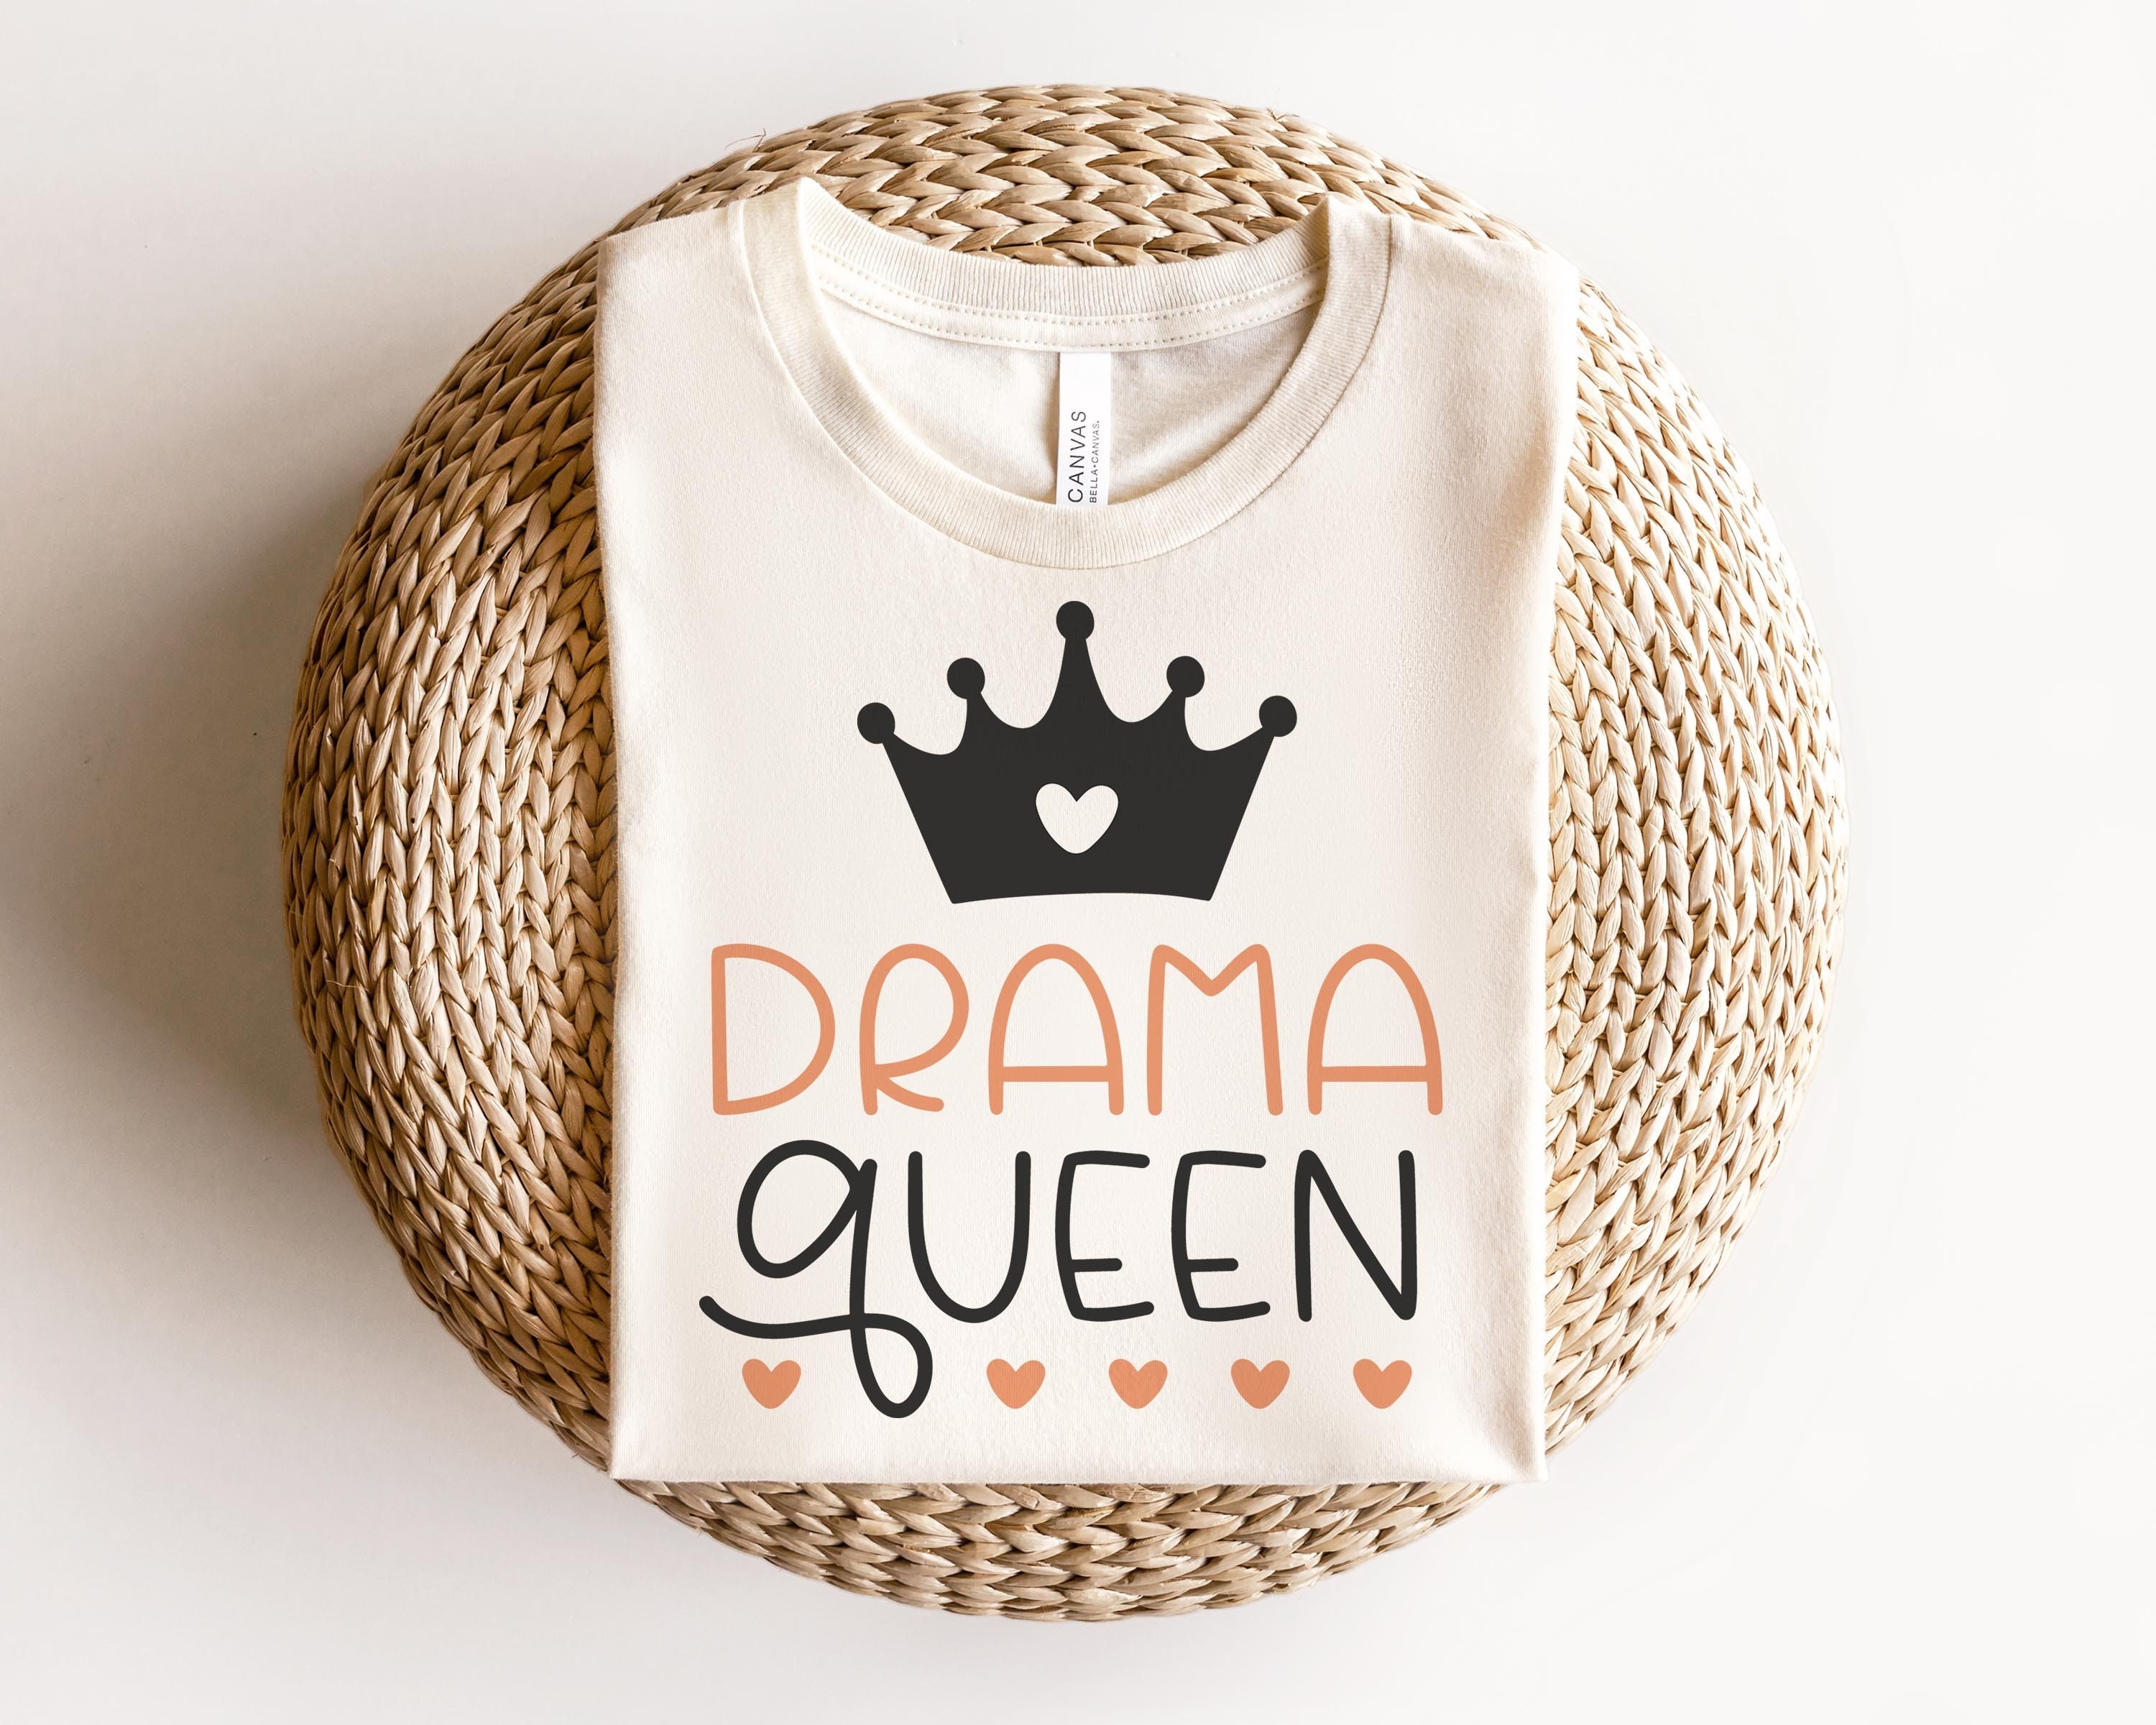 Drama Queen Tee Great Summer Ladies T-shirt With A Lovely Gold 